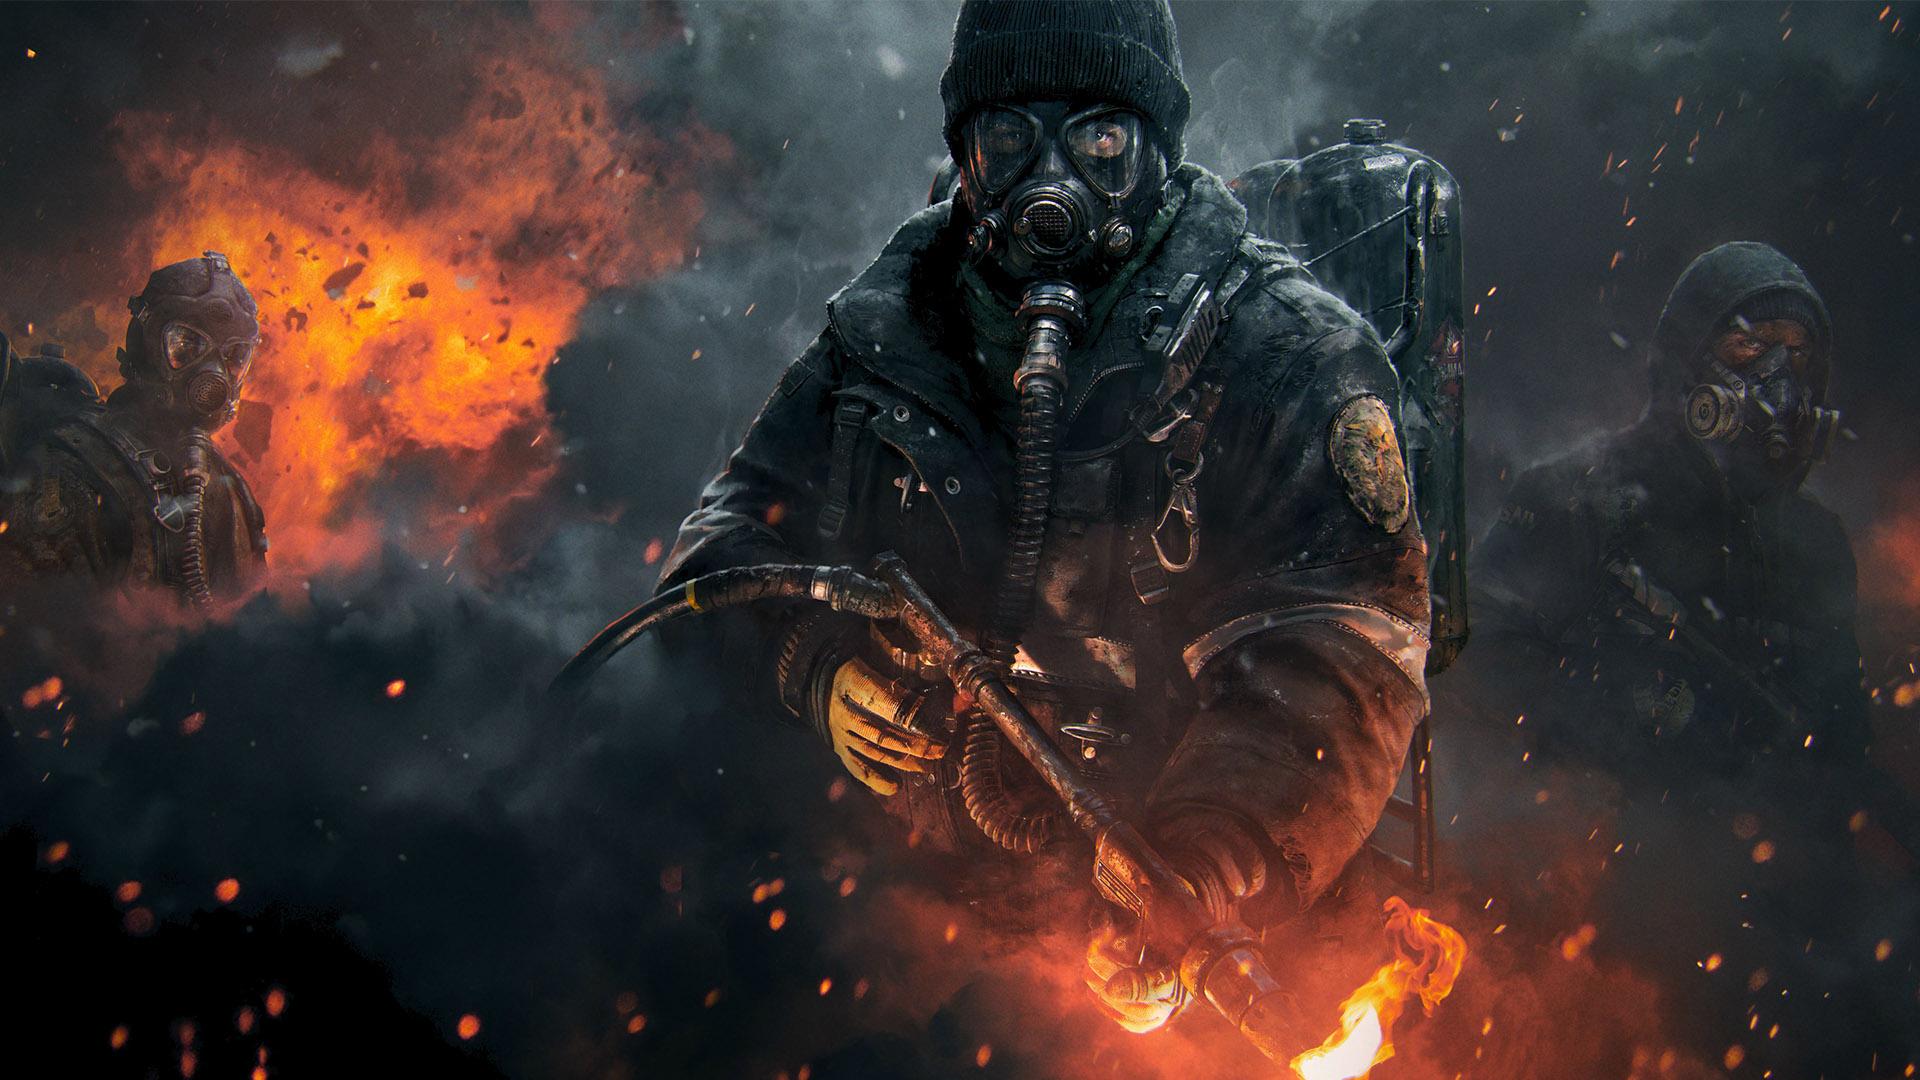 Tom Clancy's The Division 1920x1080 Wallpaper